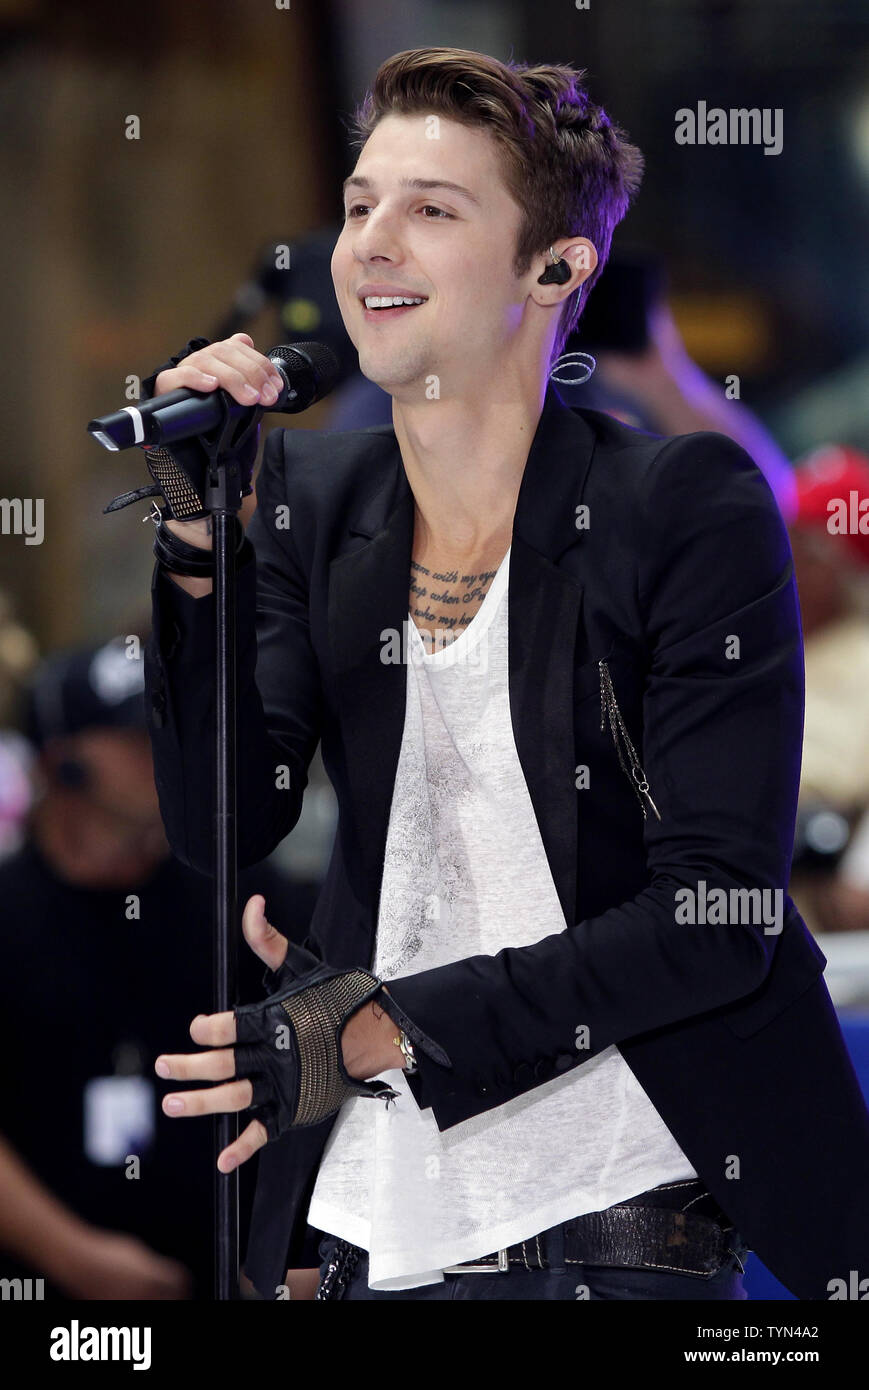 Ryan Folles and the band Hot Chelle Rae perform on the NBC Today Show at Rockefeller Center in New York City on July 20, 2012.       UPI/John Angelillo Stock Photo